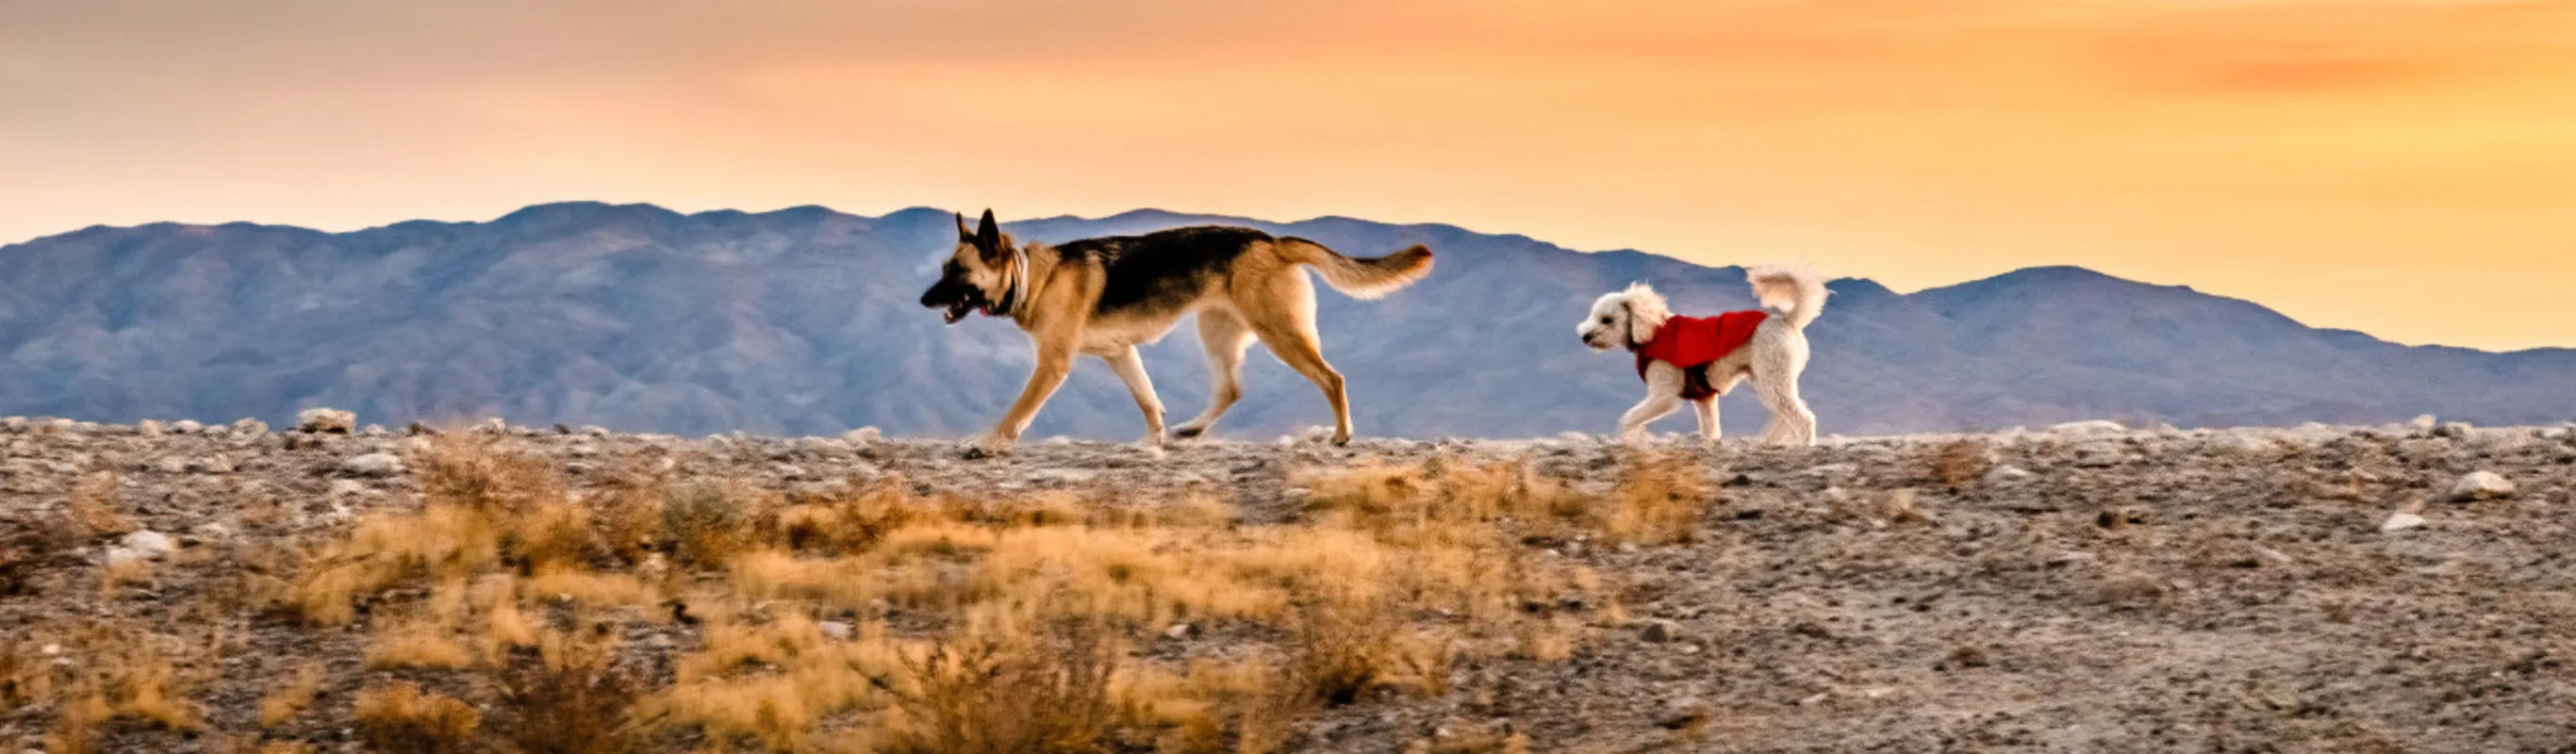 Two dogs walking on the desert